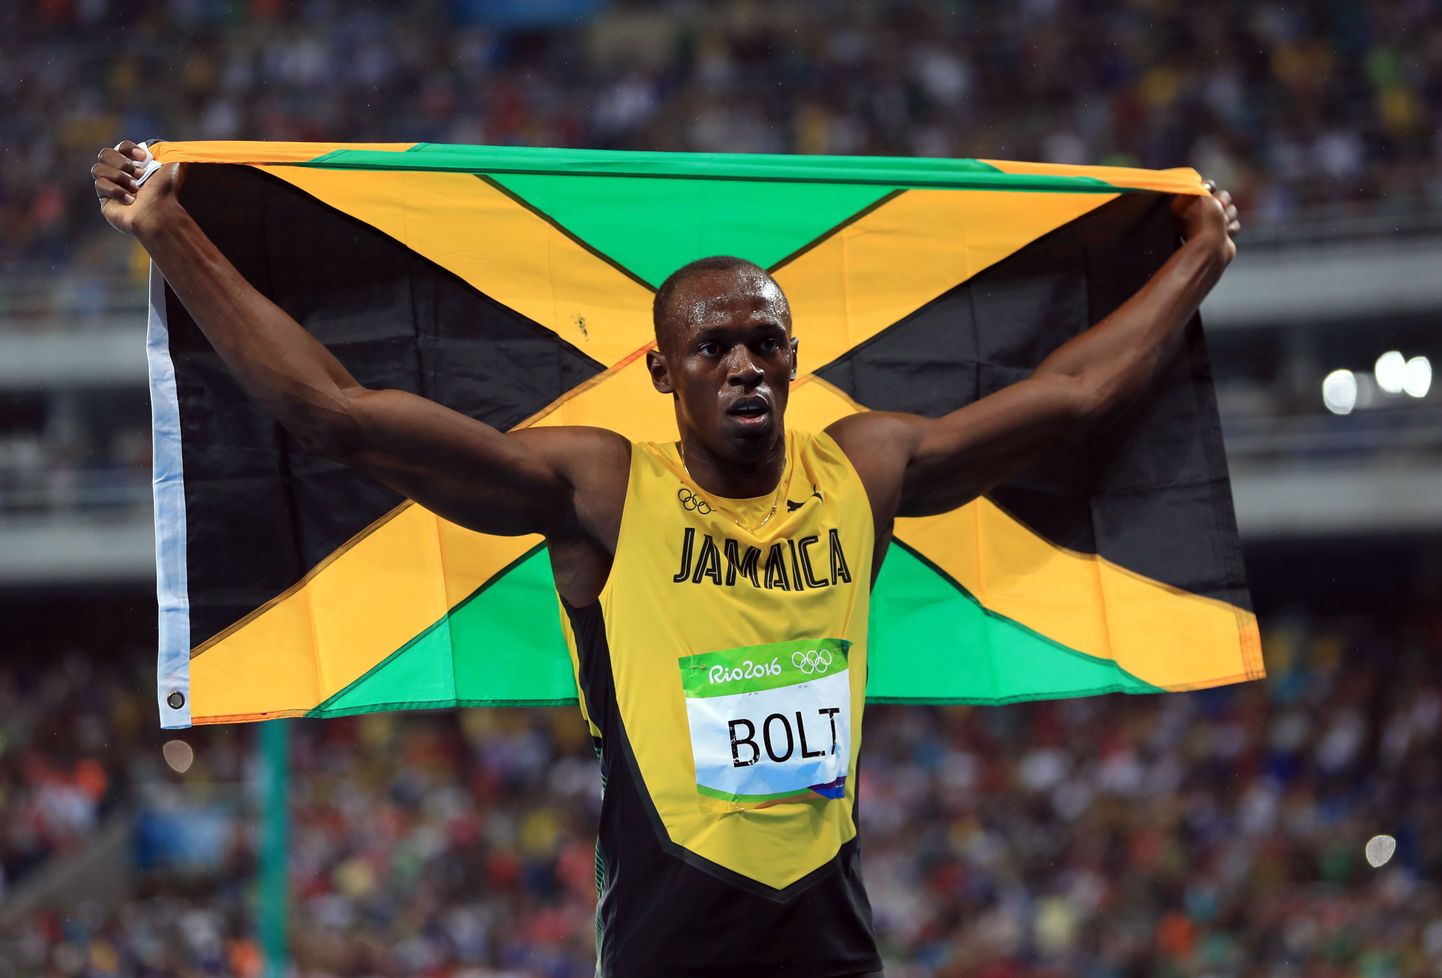 Jamaica's Usain Bolt celebrates following the men's 200m final at the Olympic Stadium on the thirteenth day of the Rio Olympics Games, Brazil.